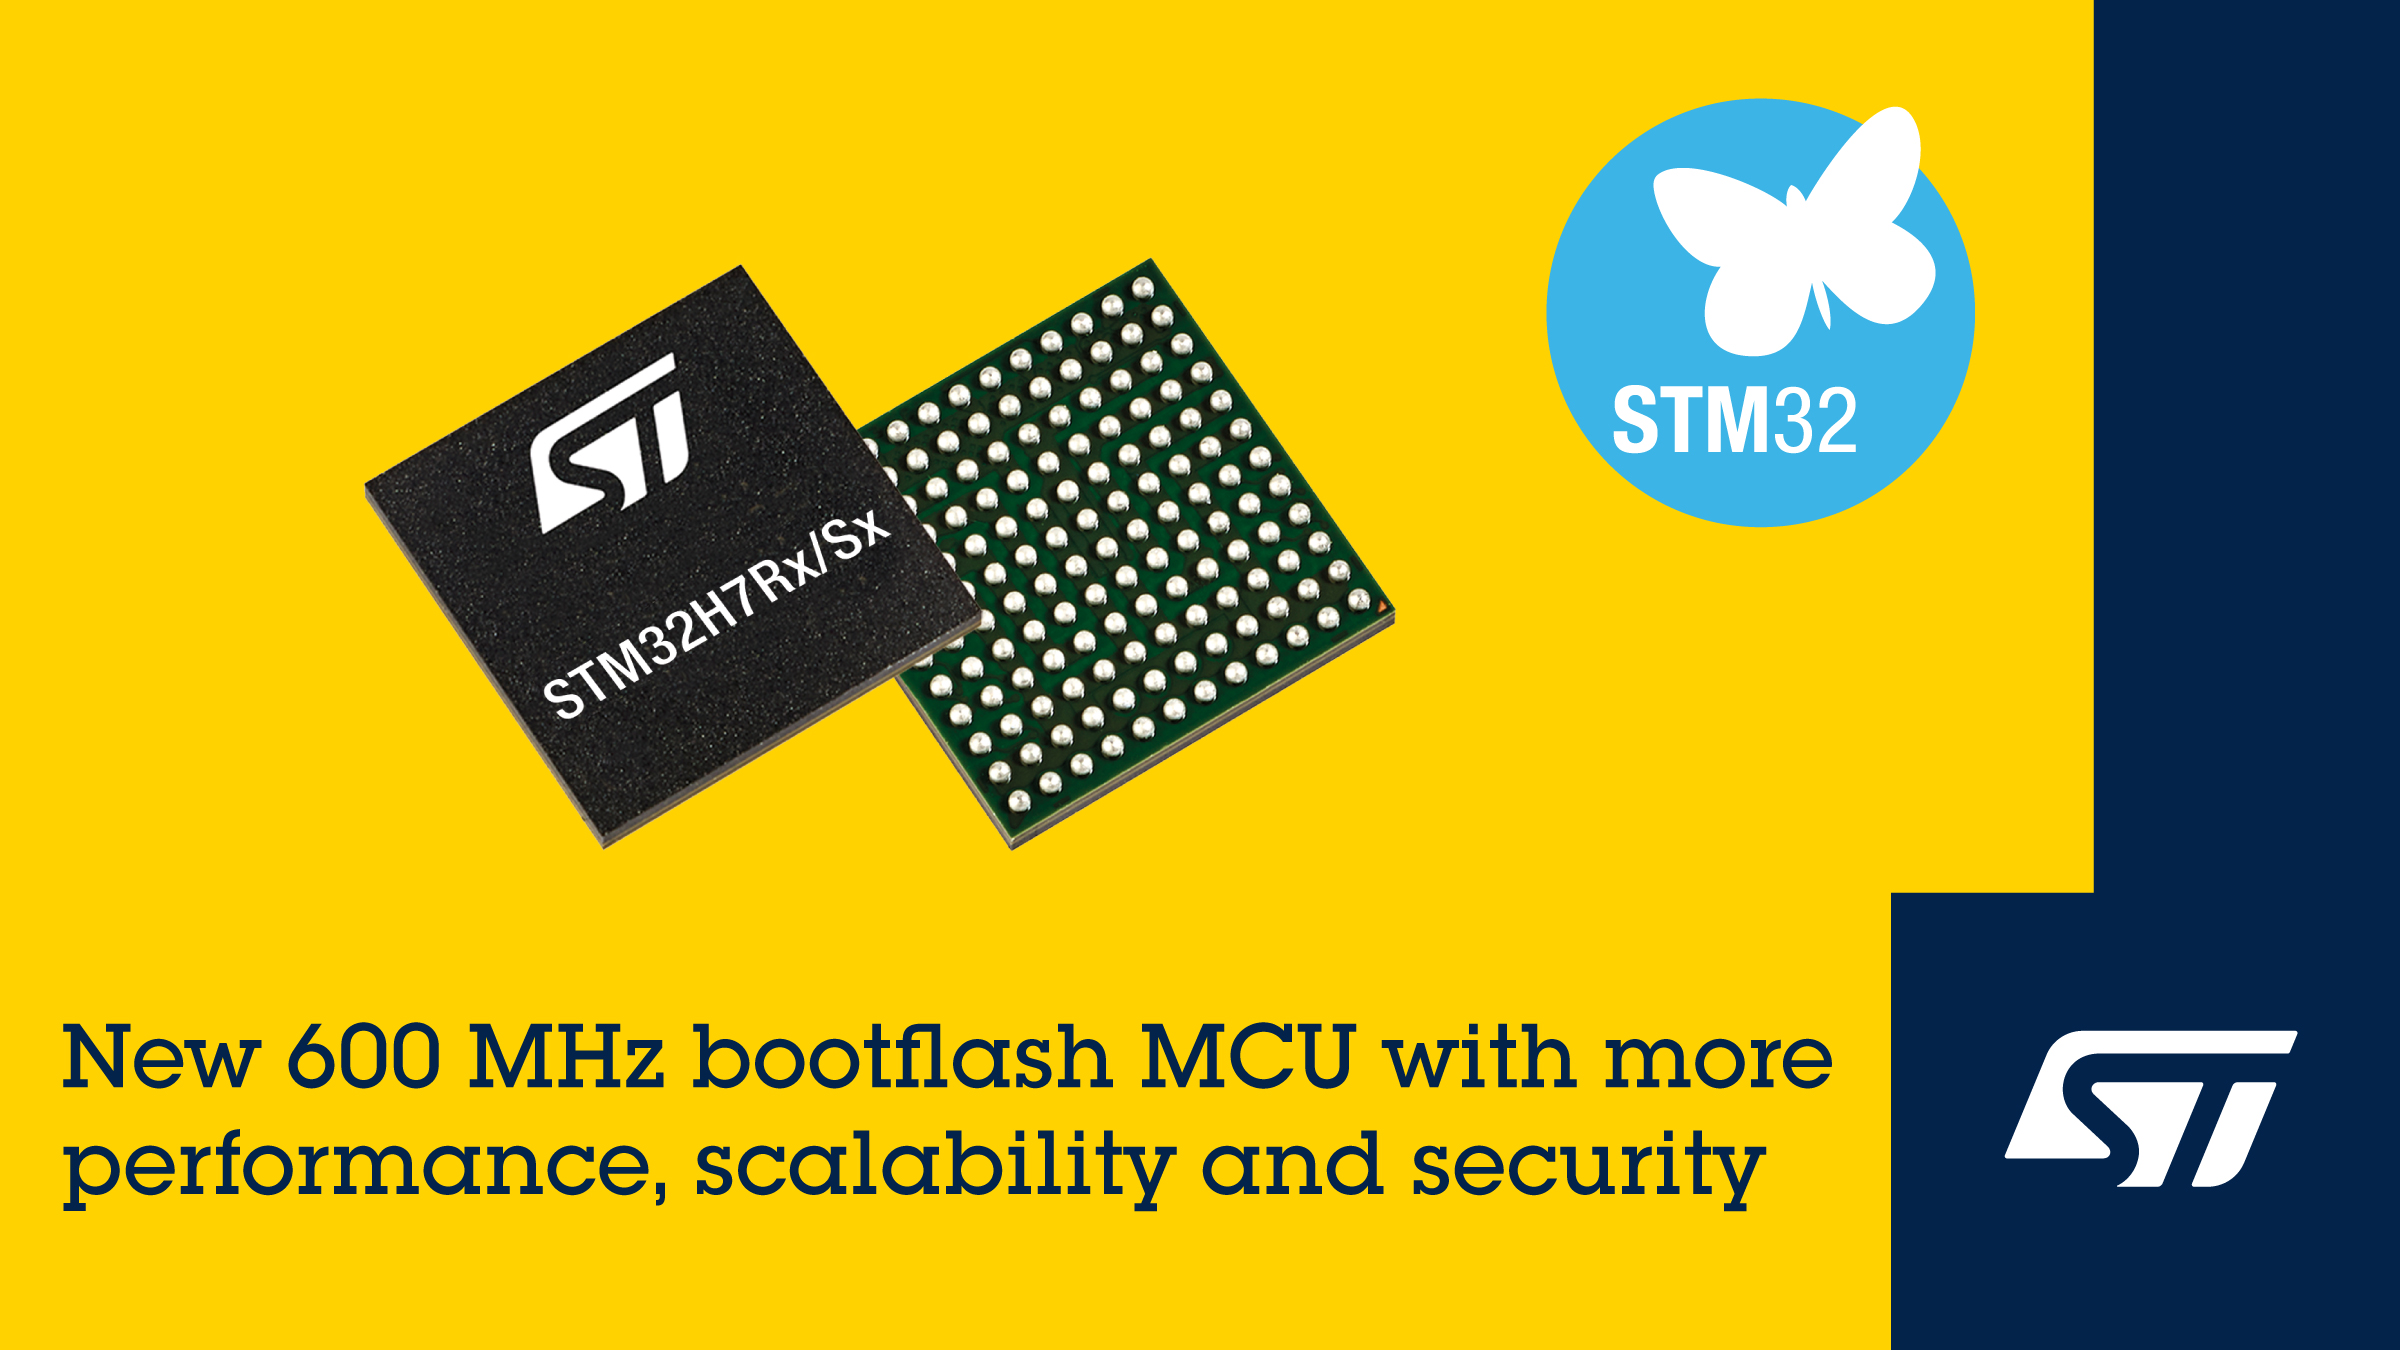 STMicroelectronics’ high-performance microcontrollers pave the way to new innovations